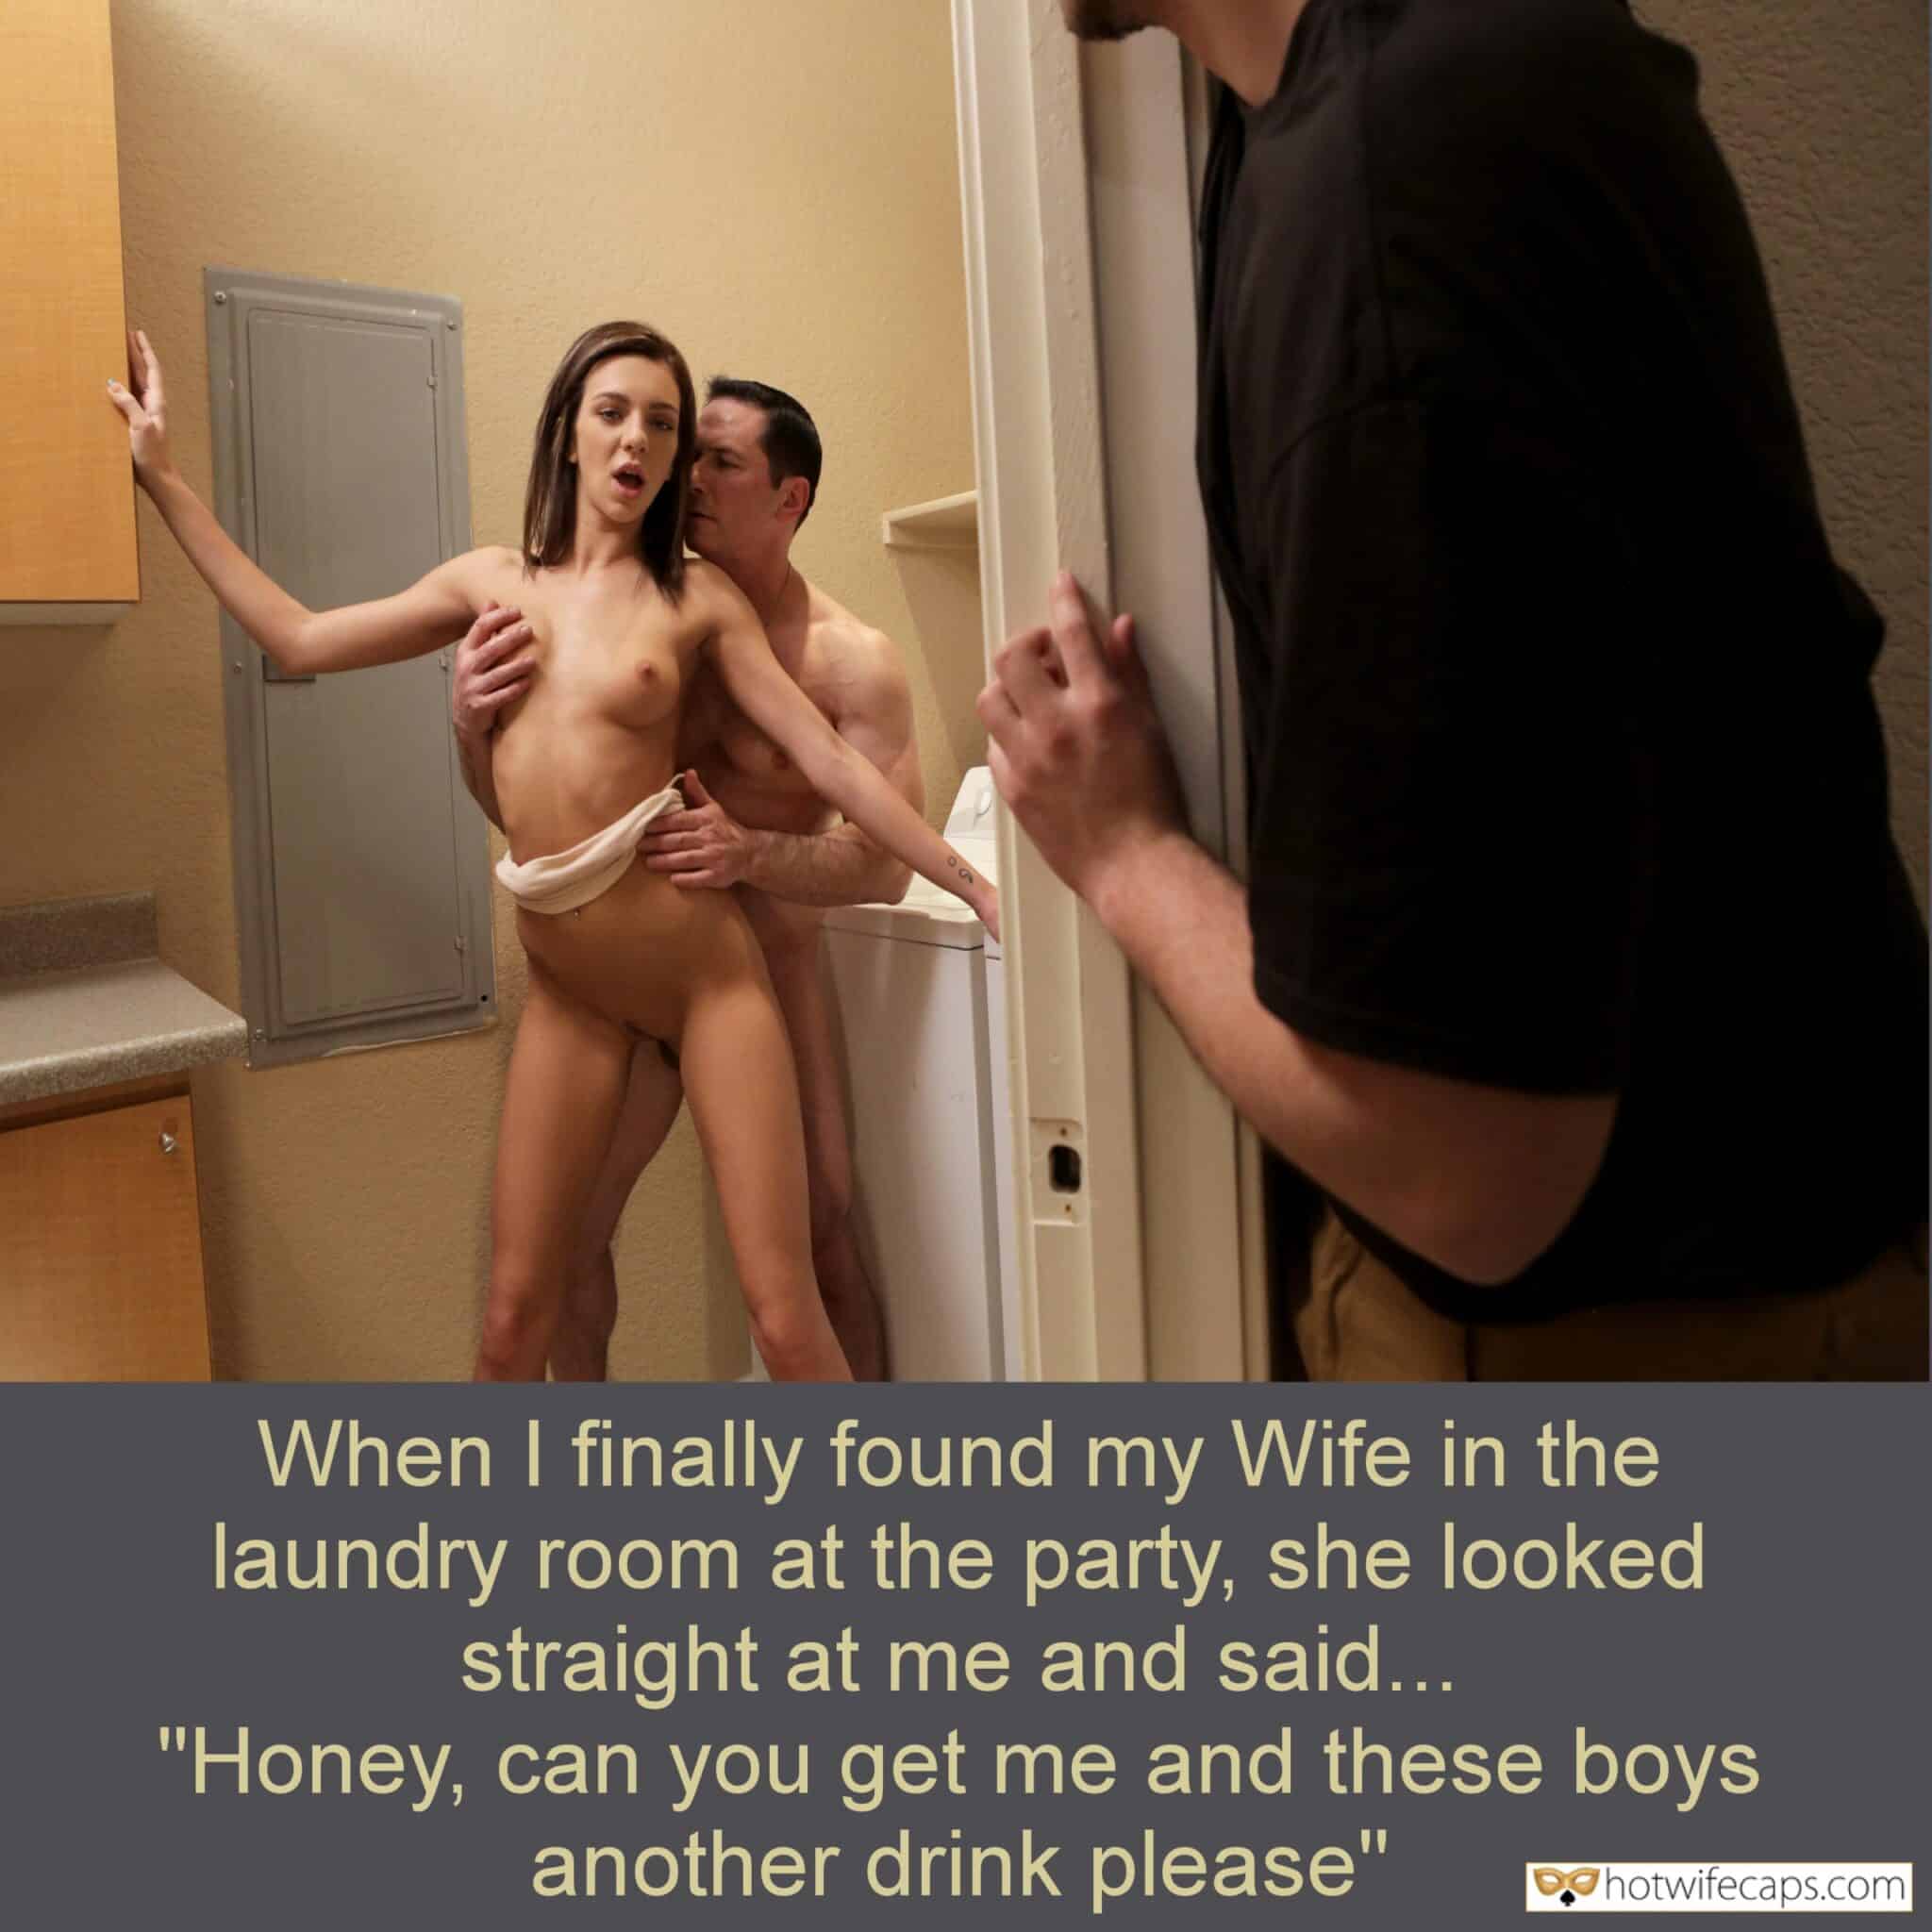 Cheating, Femdom, Humiliation, Public Hotwife Caption №14254 when i caught her fucking bitch refused to stop image